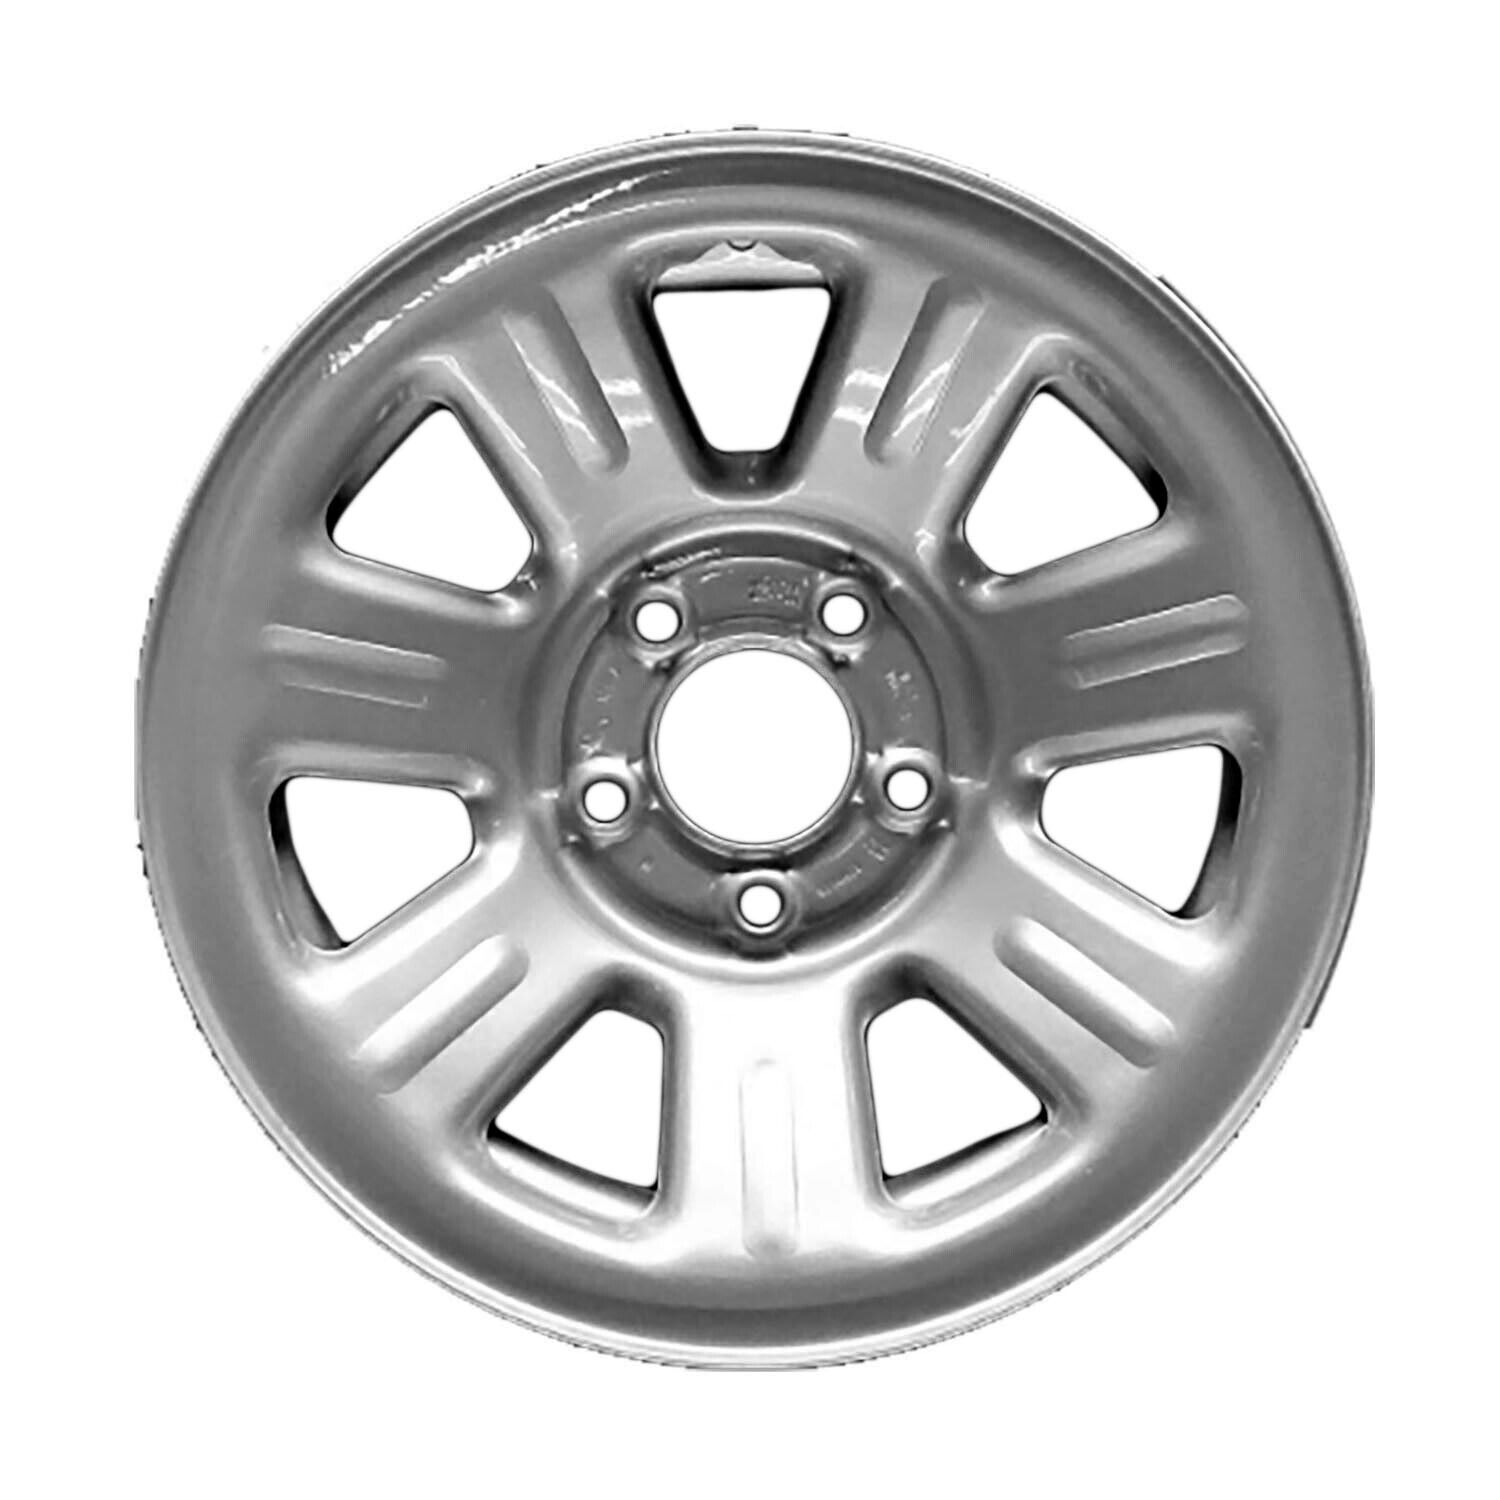 03404 New COMPATIBLE Steel Wheel Rim Silver 15in Fits 2005 Ford Ranger